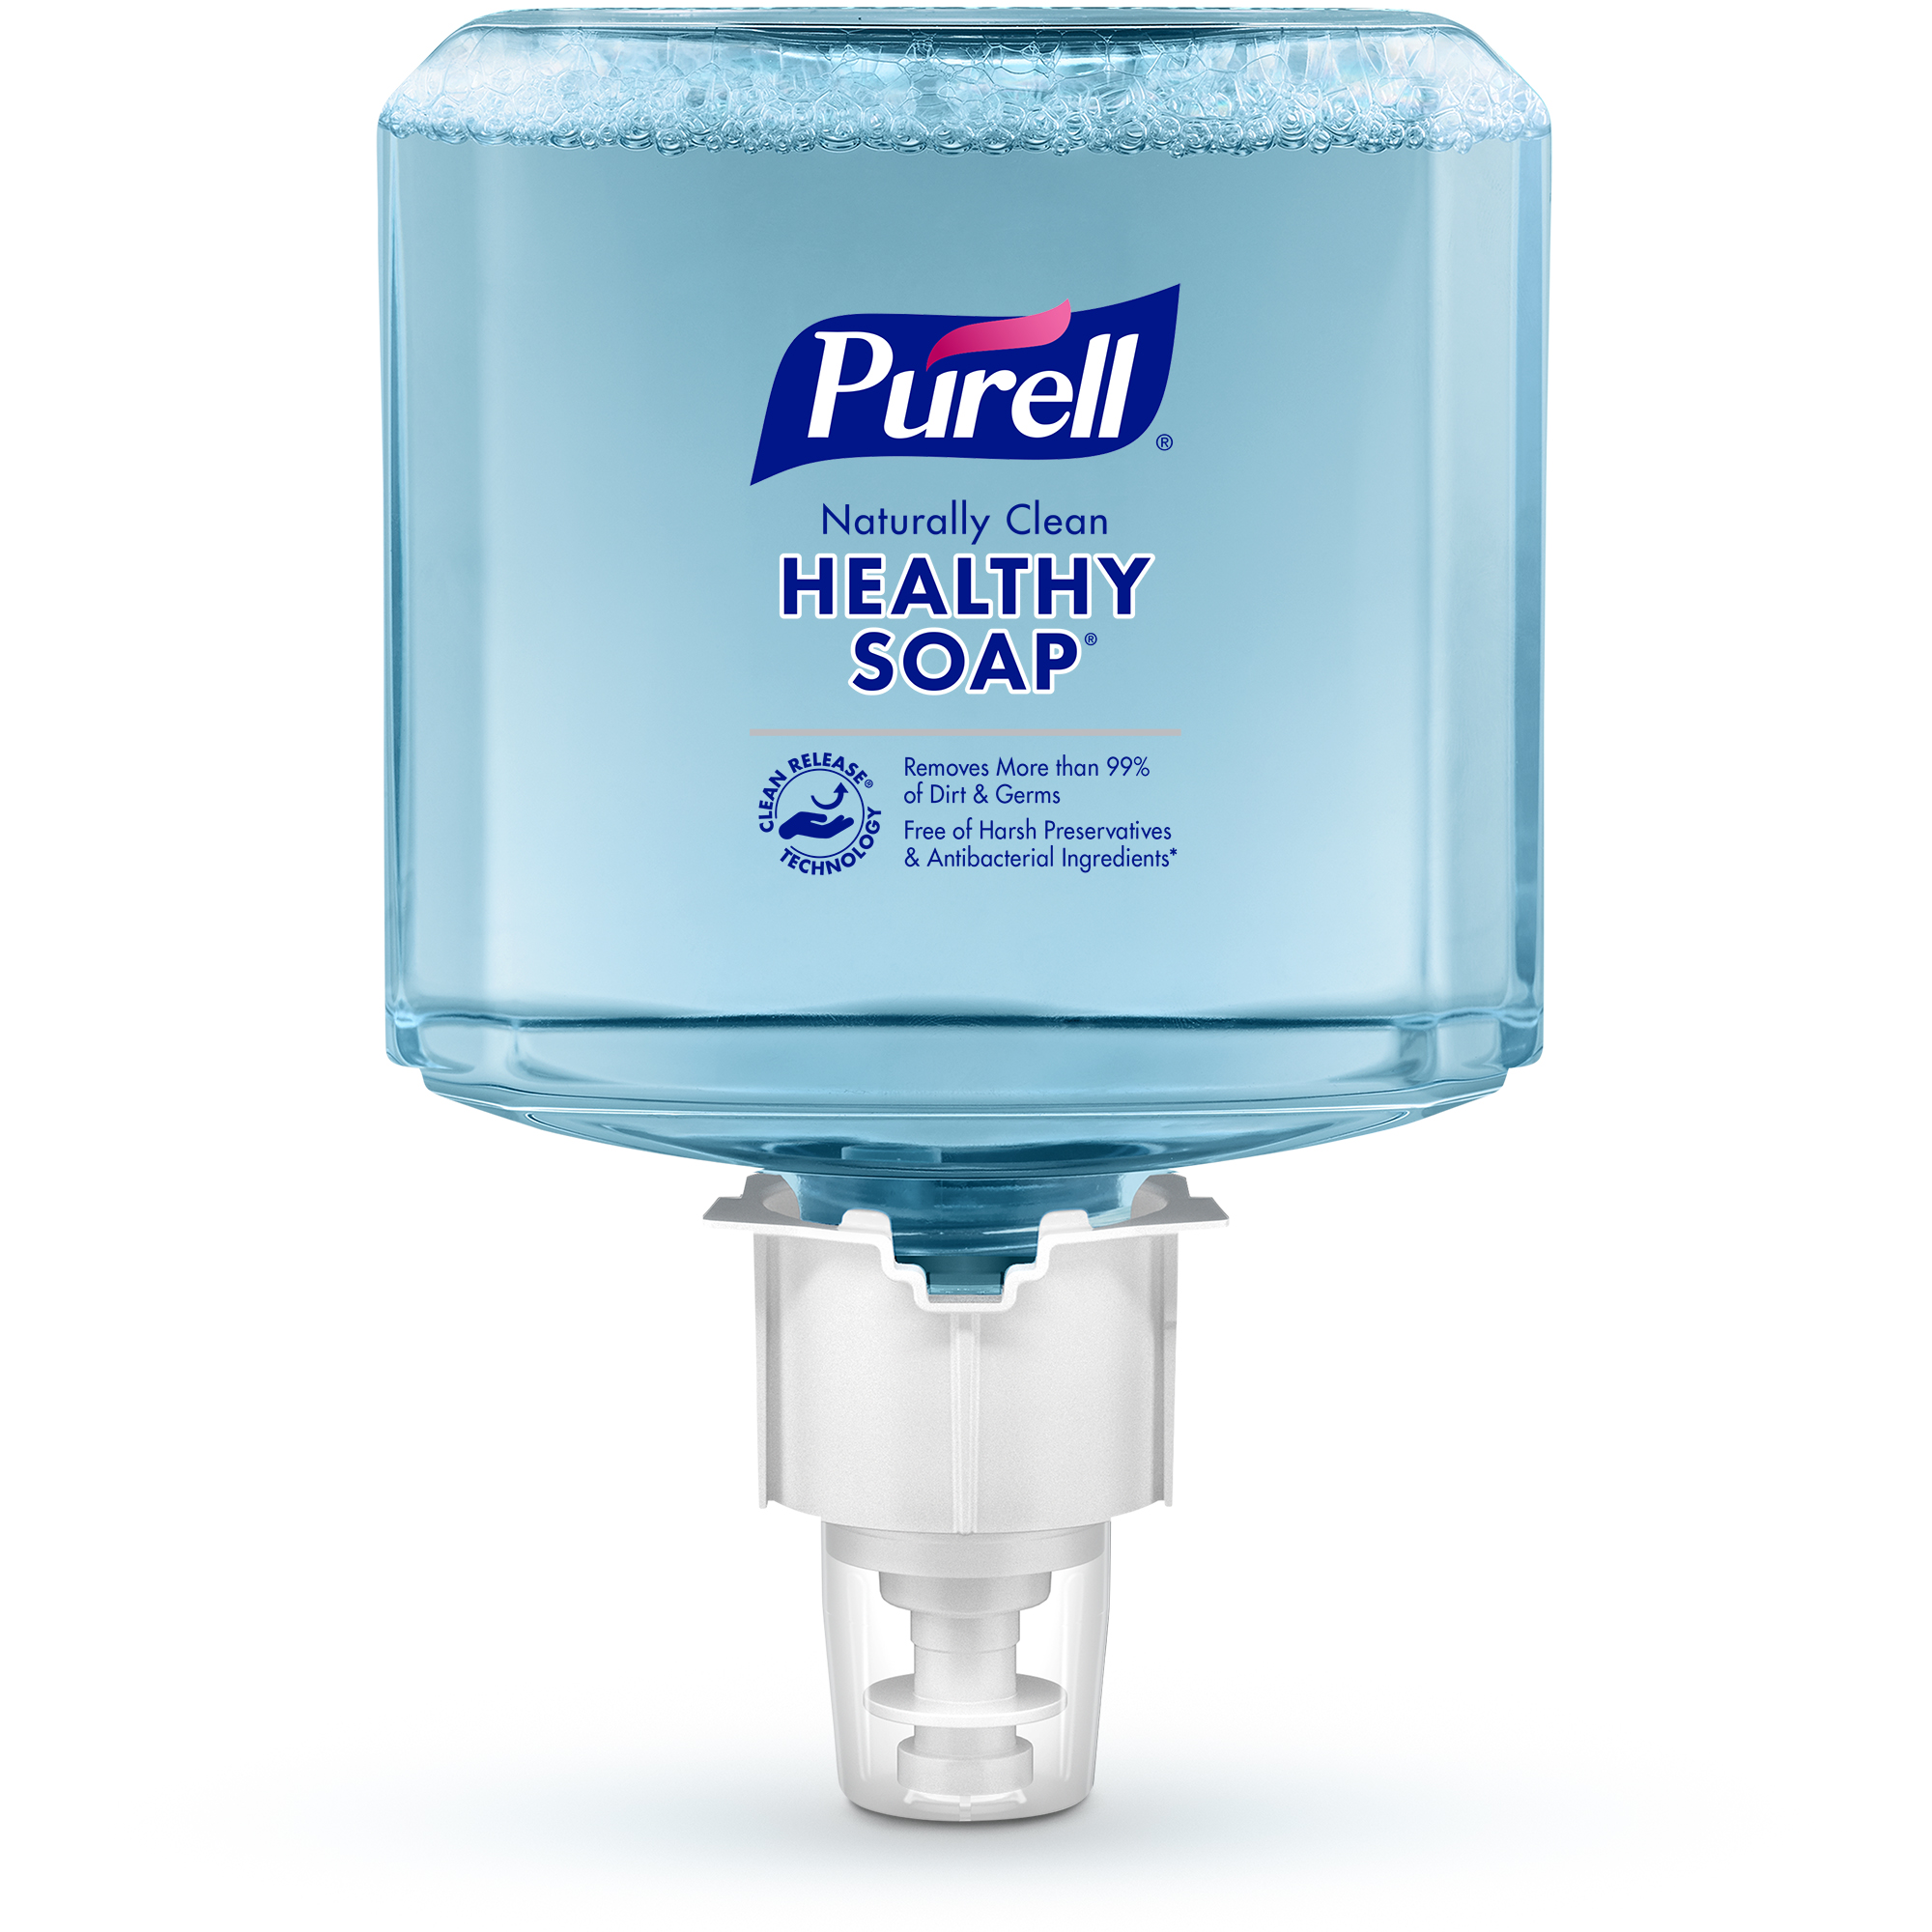 GOJO - PURELL CRT HEALTHY SOAP Naturally Clean Foam -  5071-02